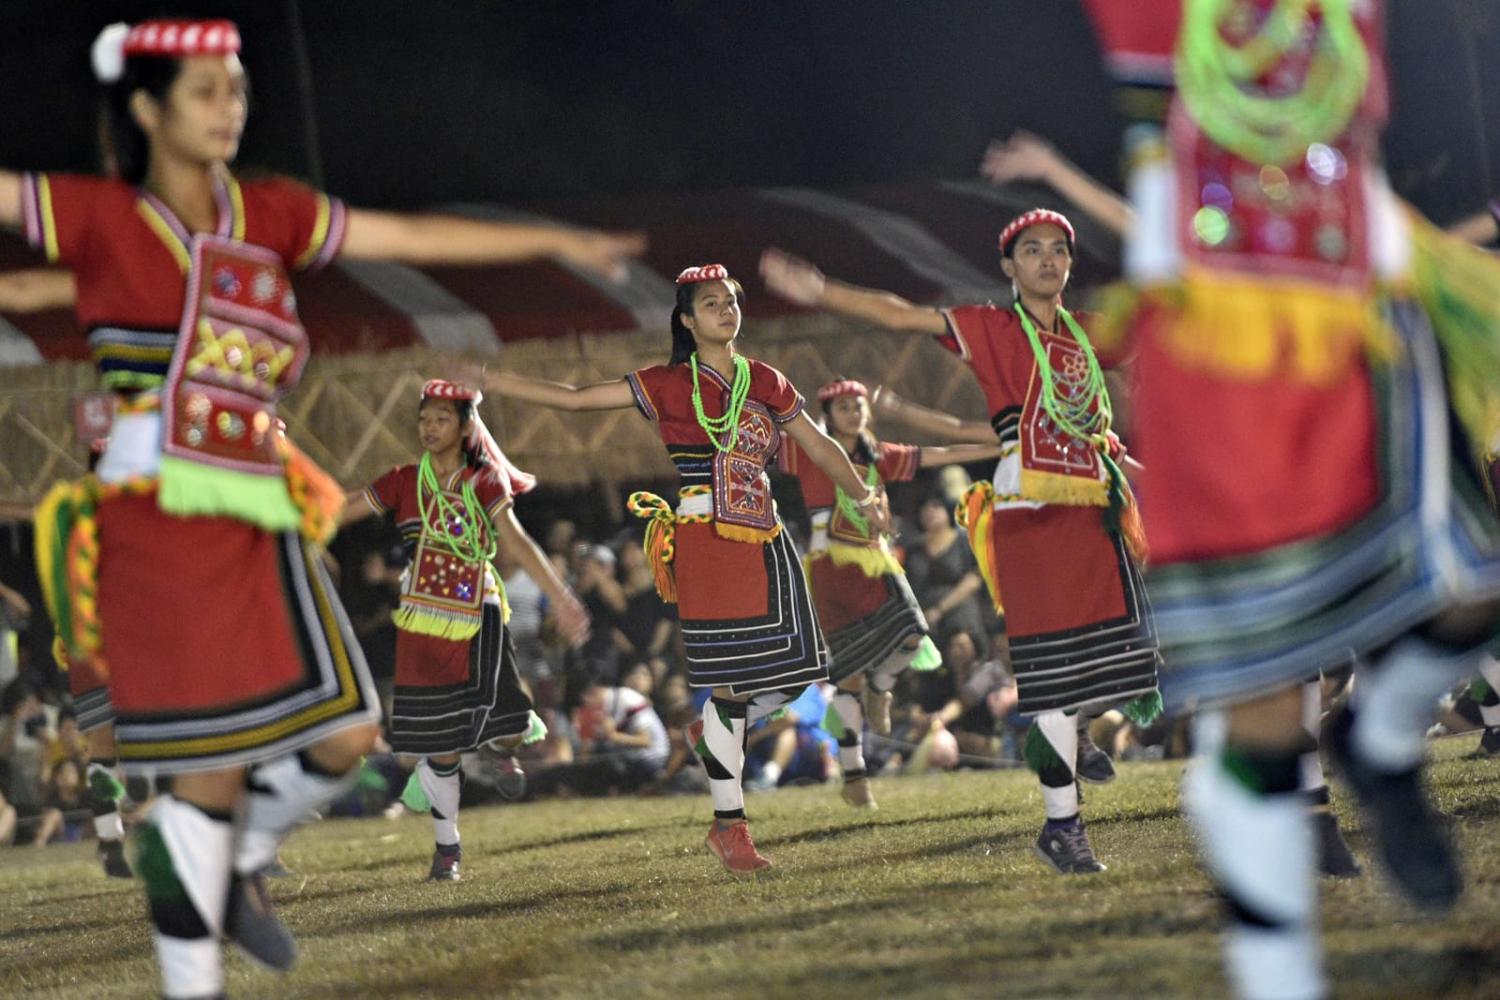 Members of the Amis Indigenous group dancing during the traditional harvest festival in Hualien, eastern Taiwan (Sam Yeh/AFP via Getty Images)